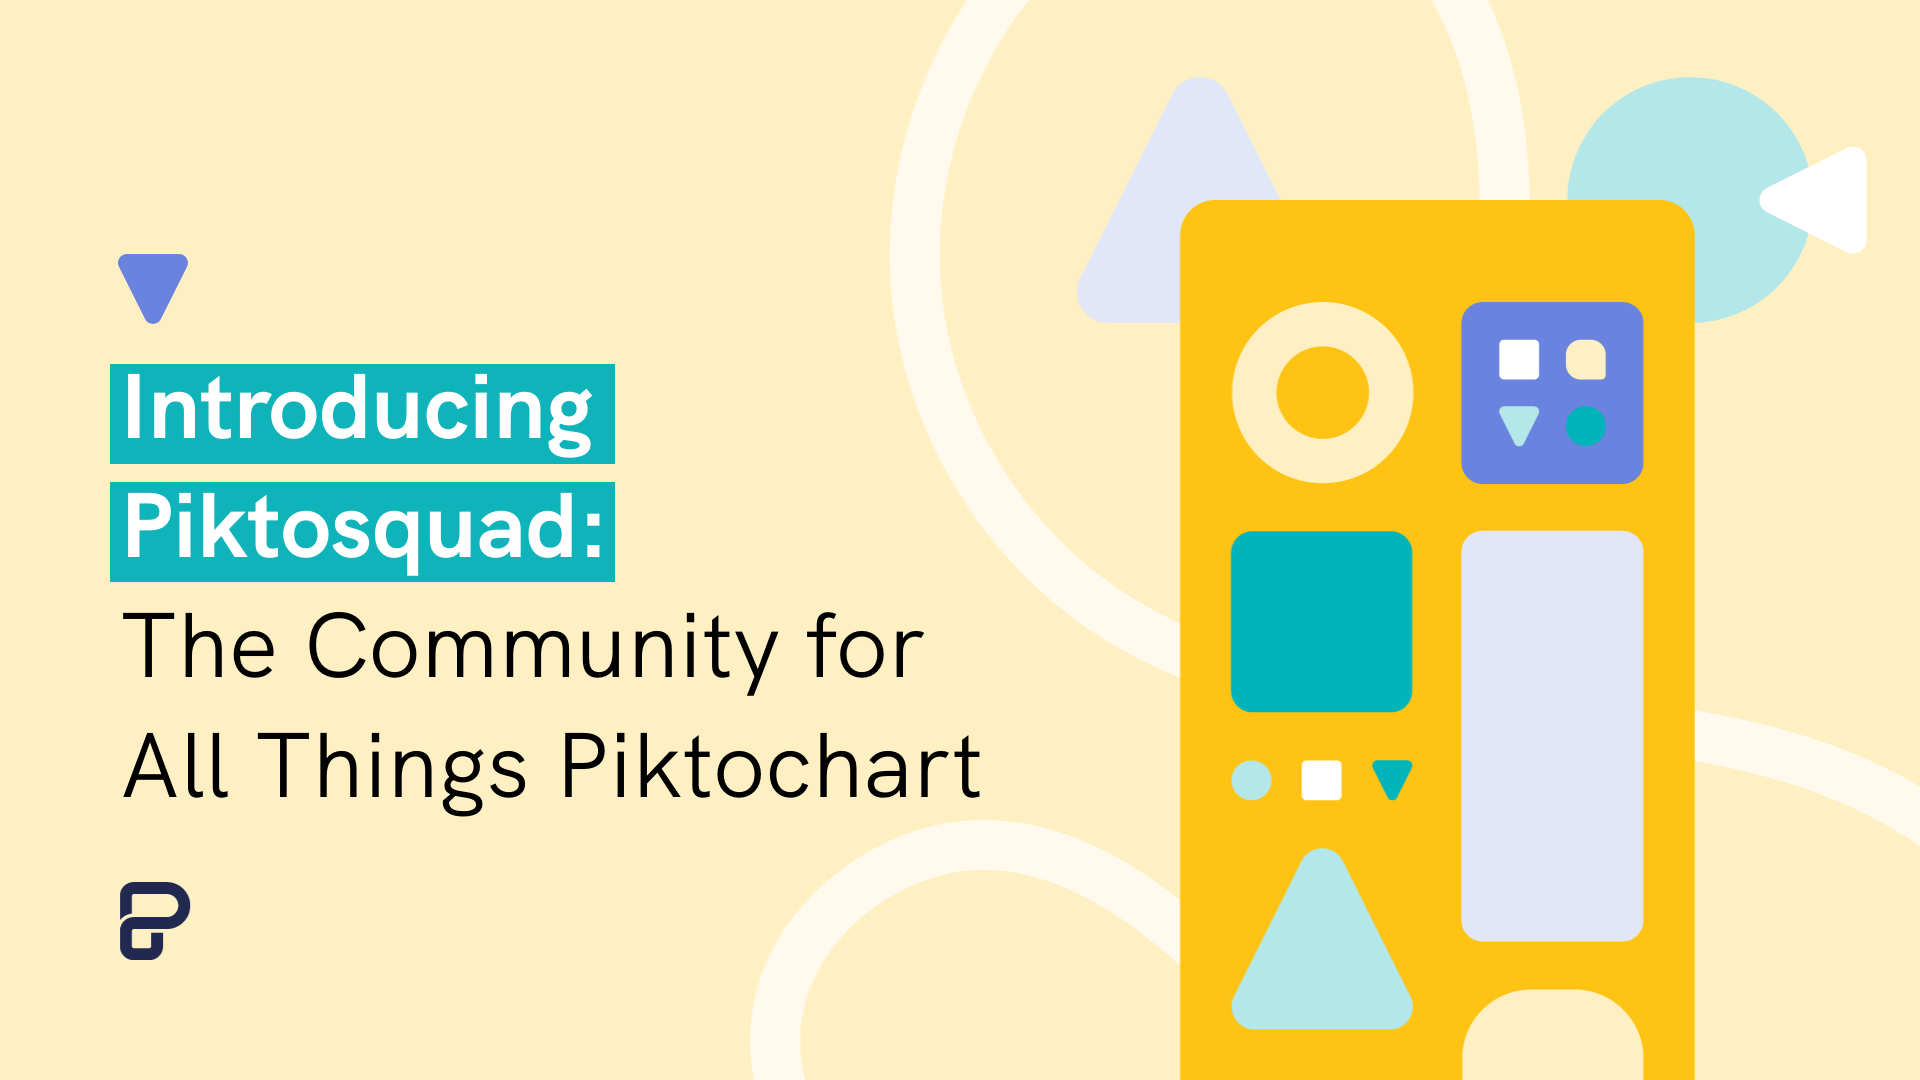 featured image for introducing piktosquad comunity